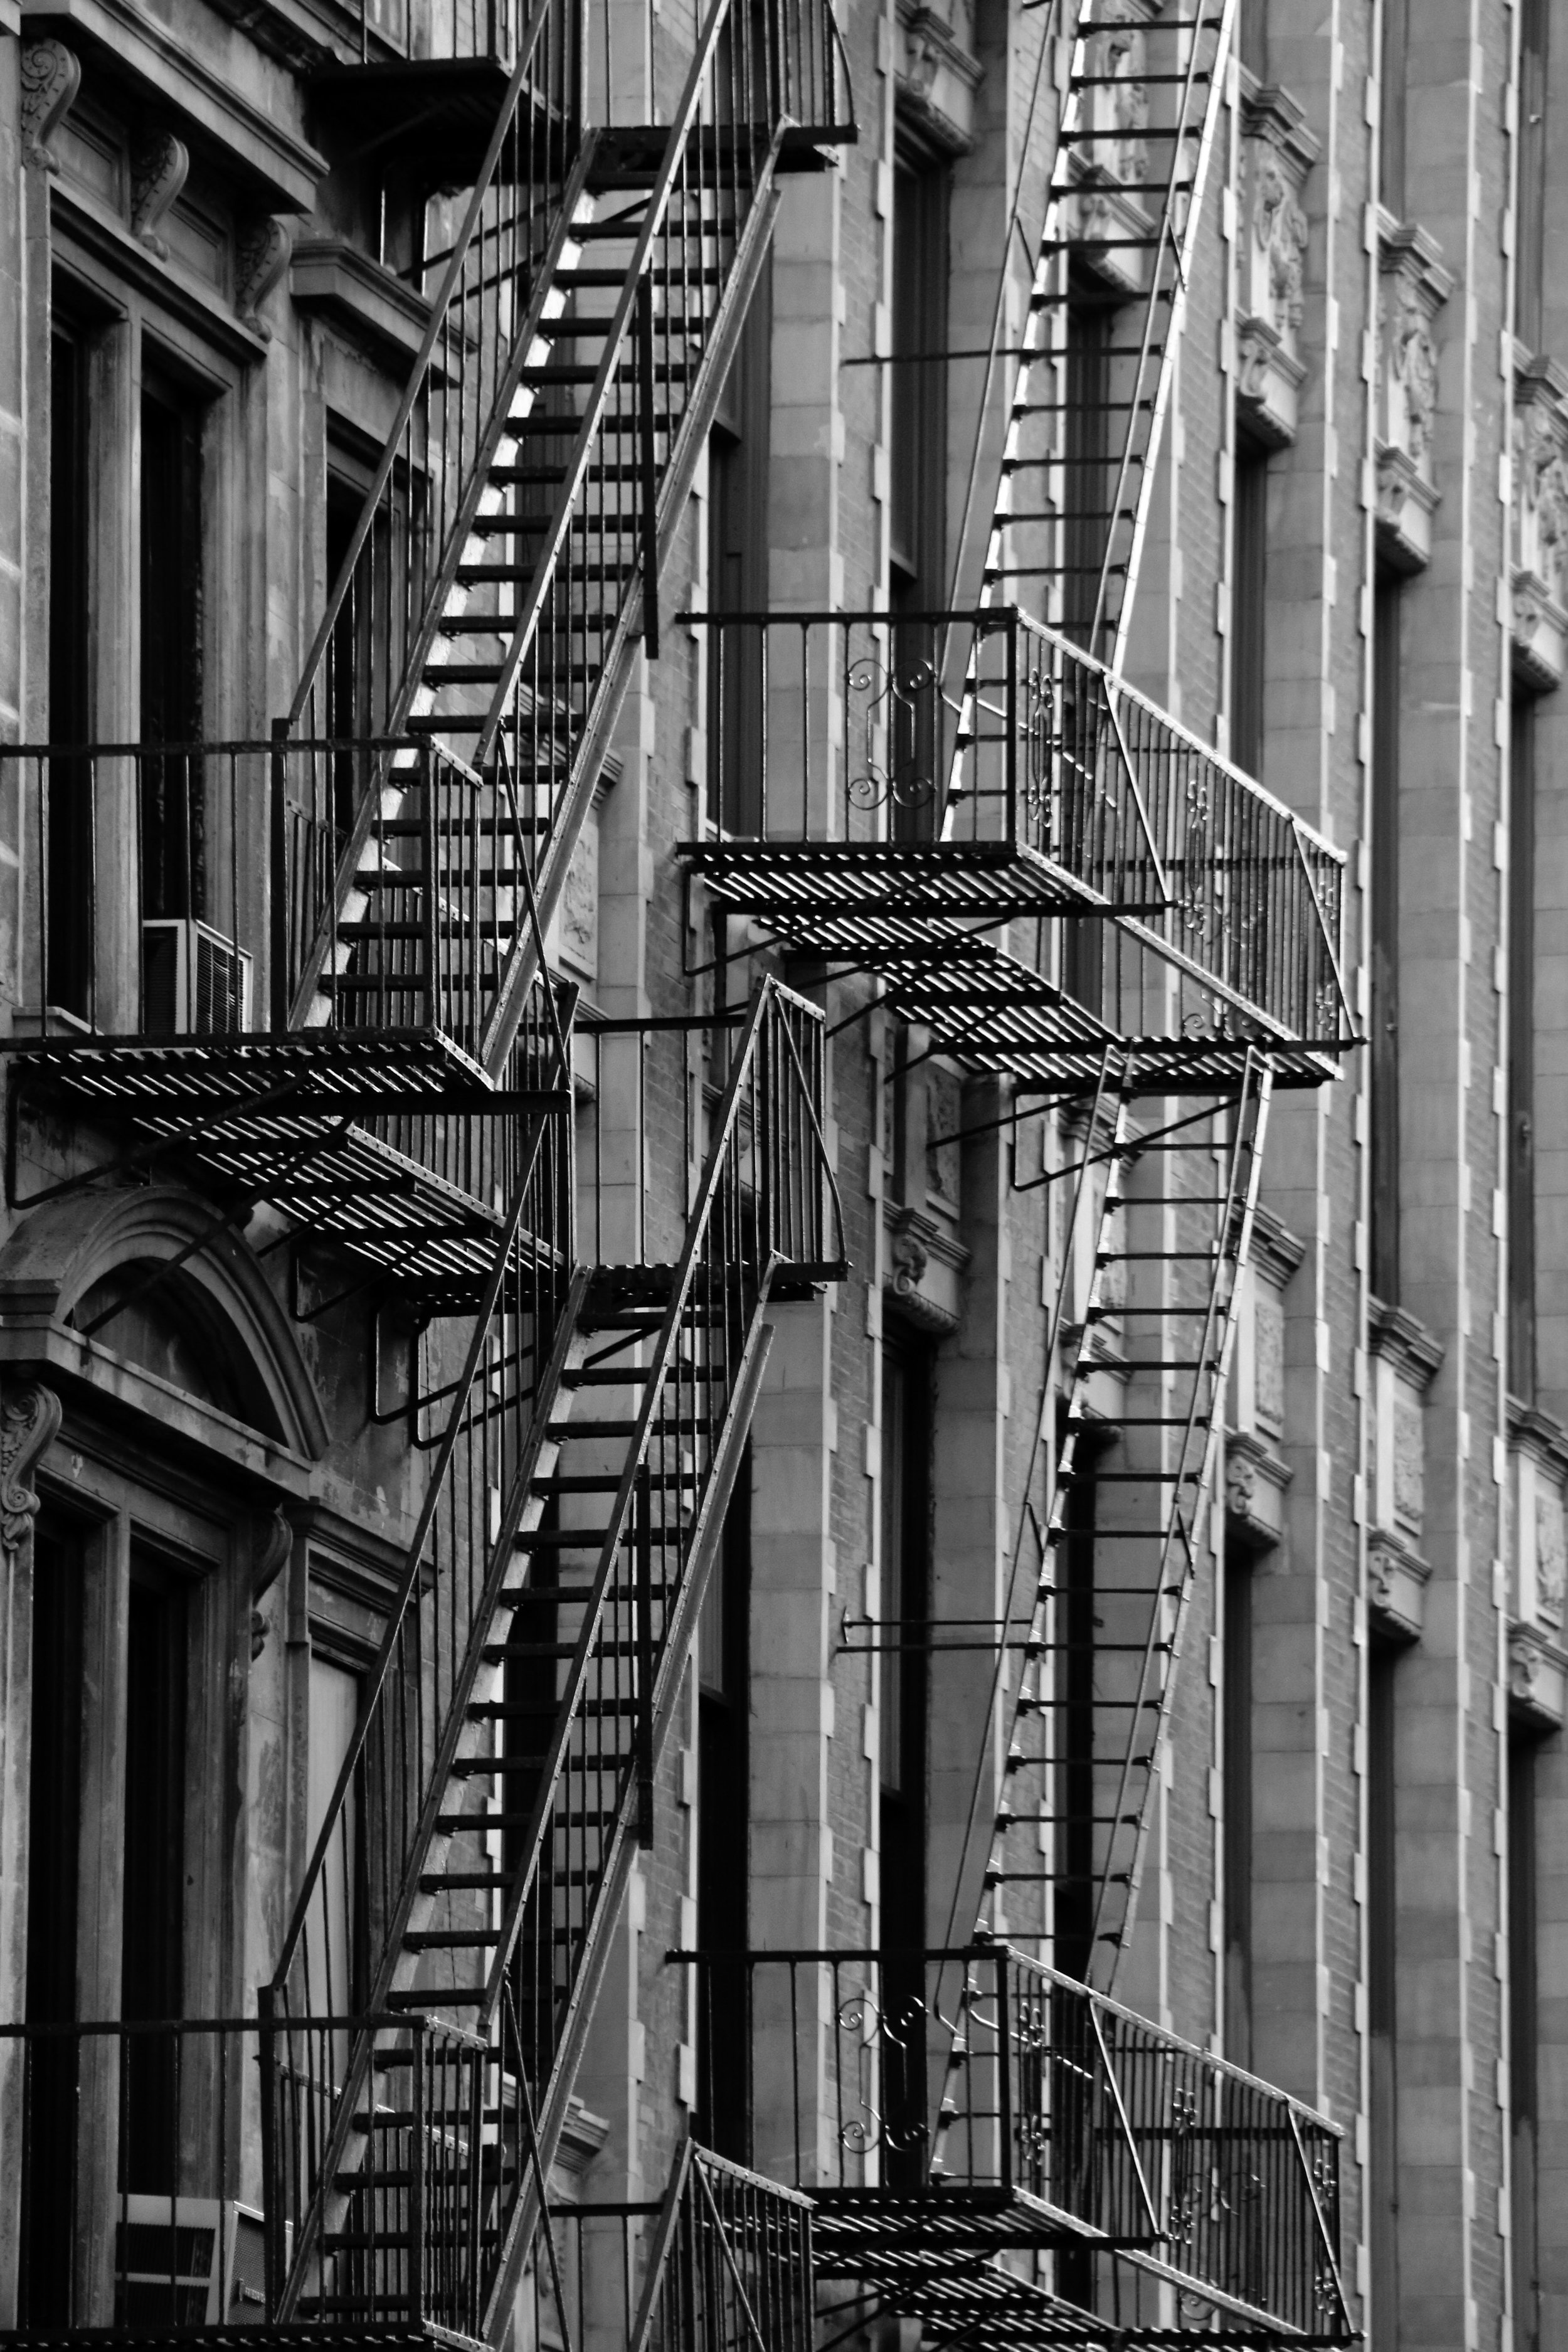 NYC Fire Escapes